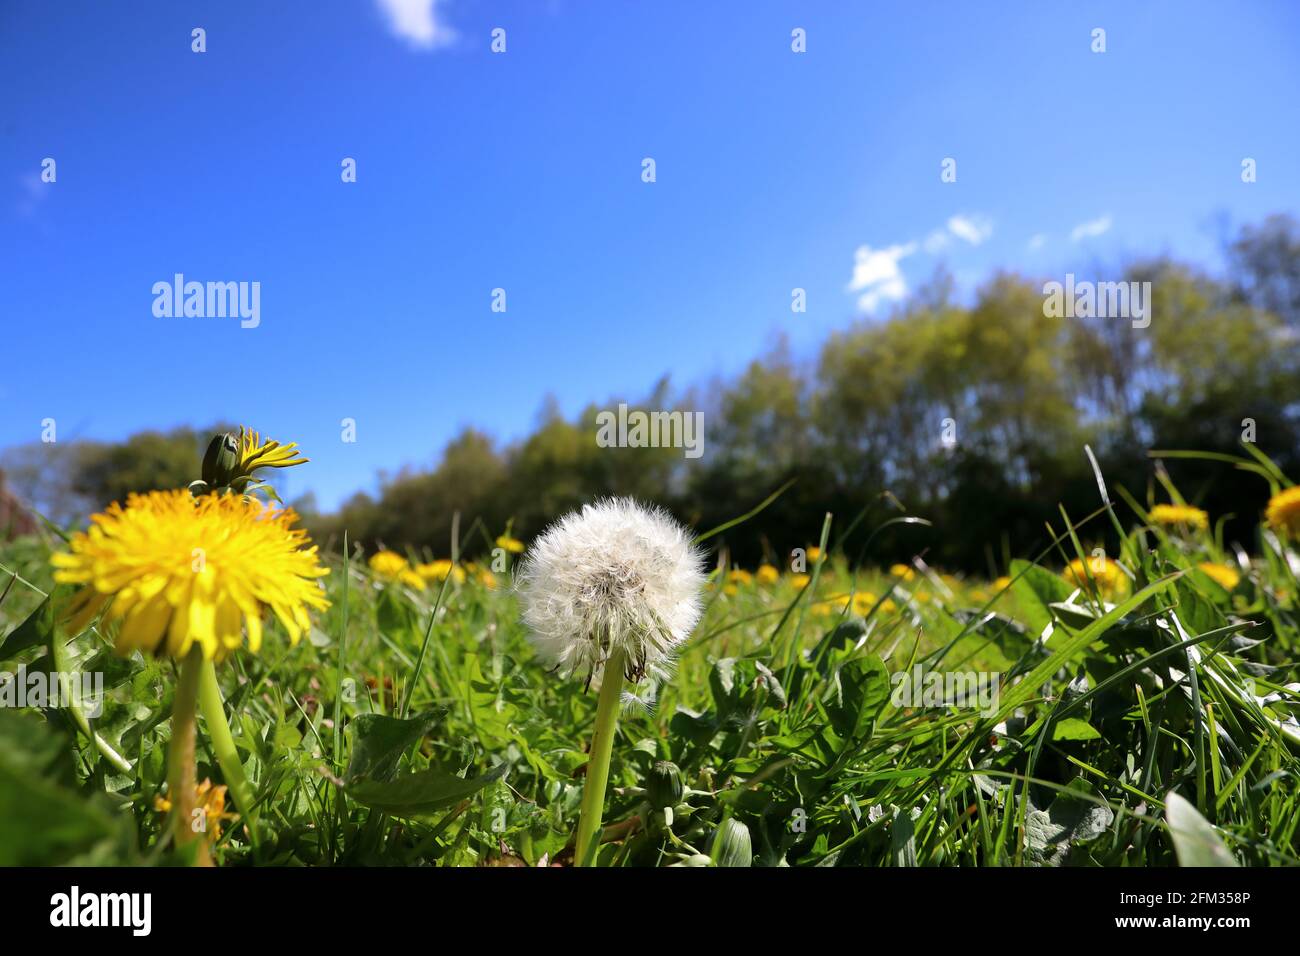 a dandelion (taraxacum officinale) clock seed head and flower fore ground Stock Photo